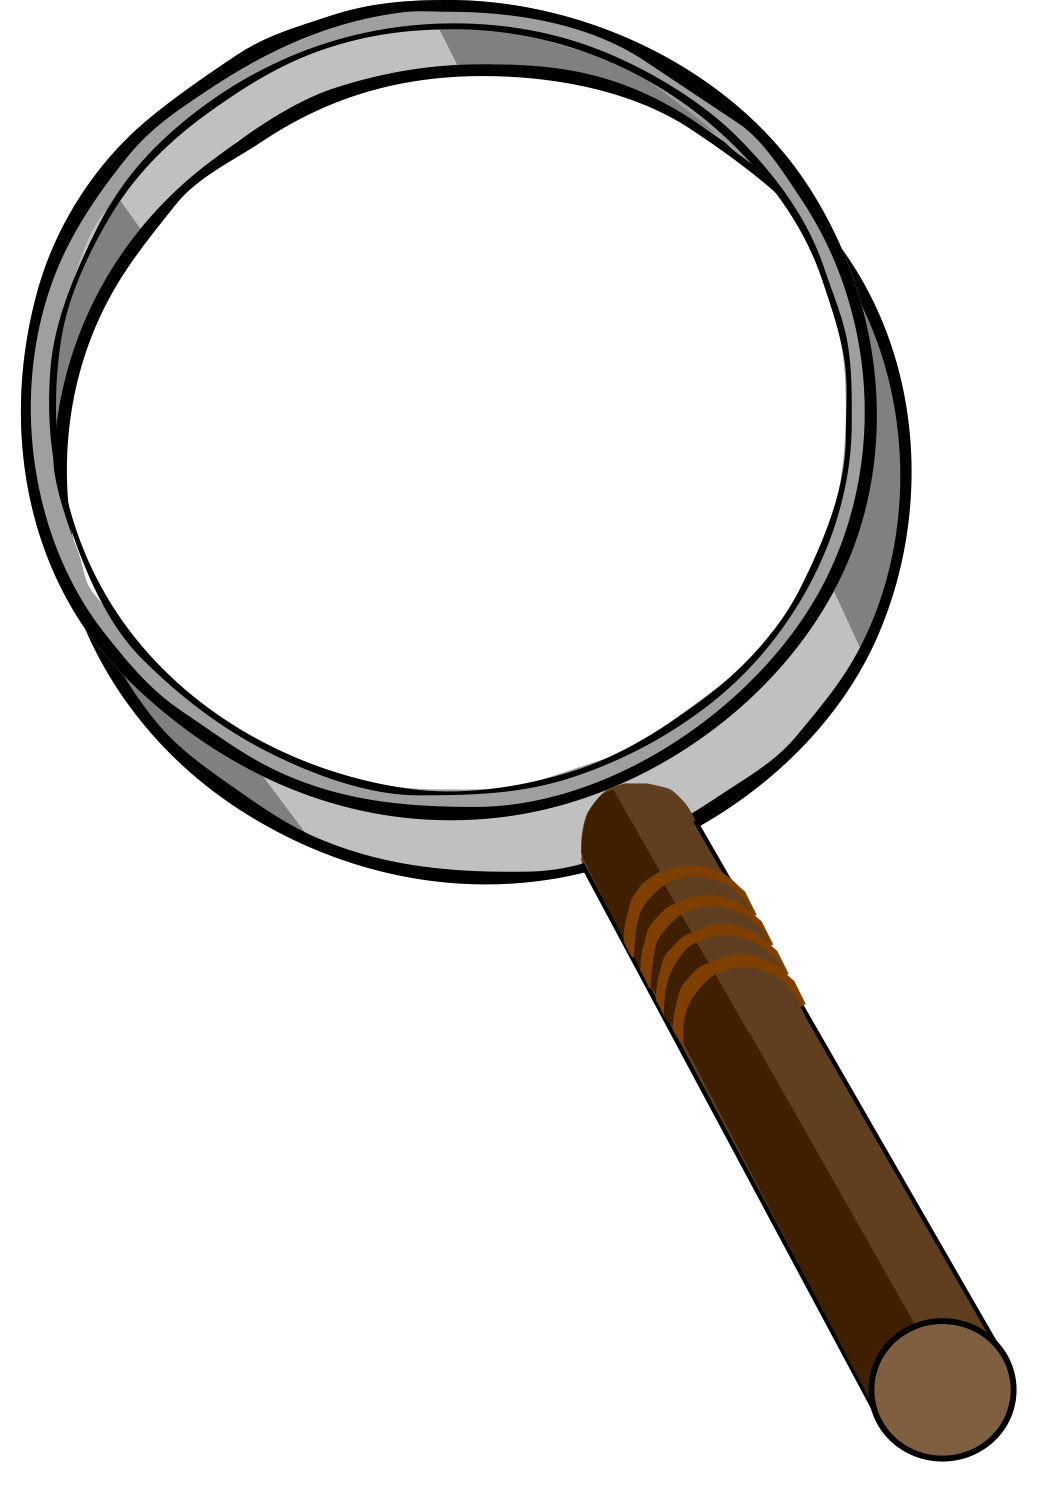 magnifying-glass-clip-art- 